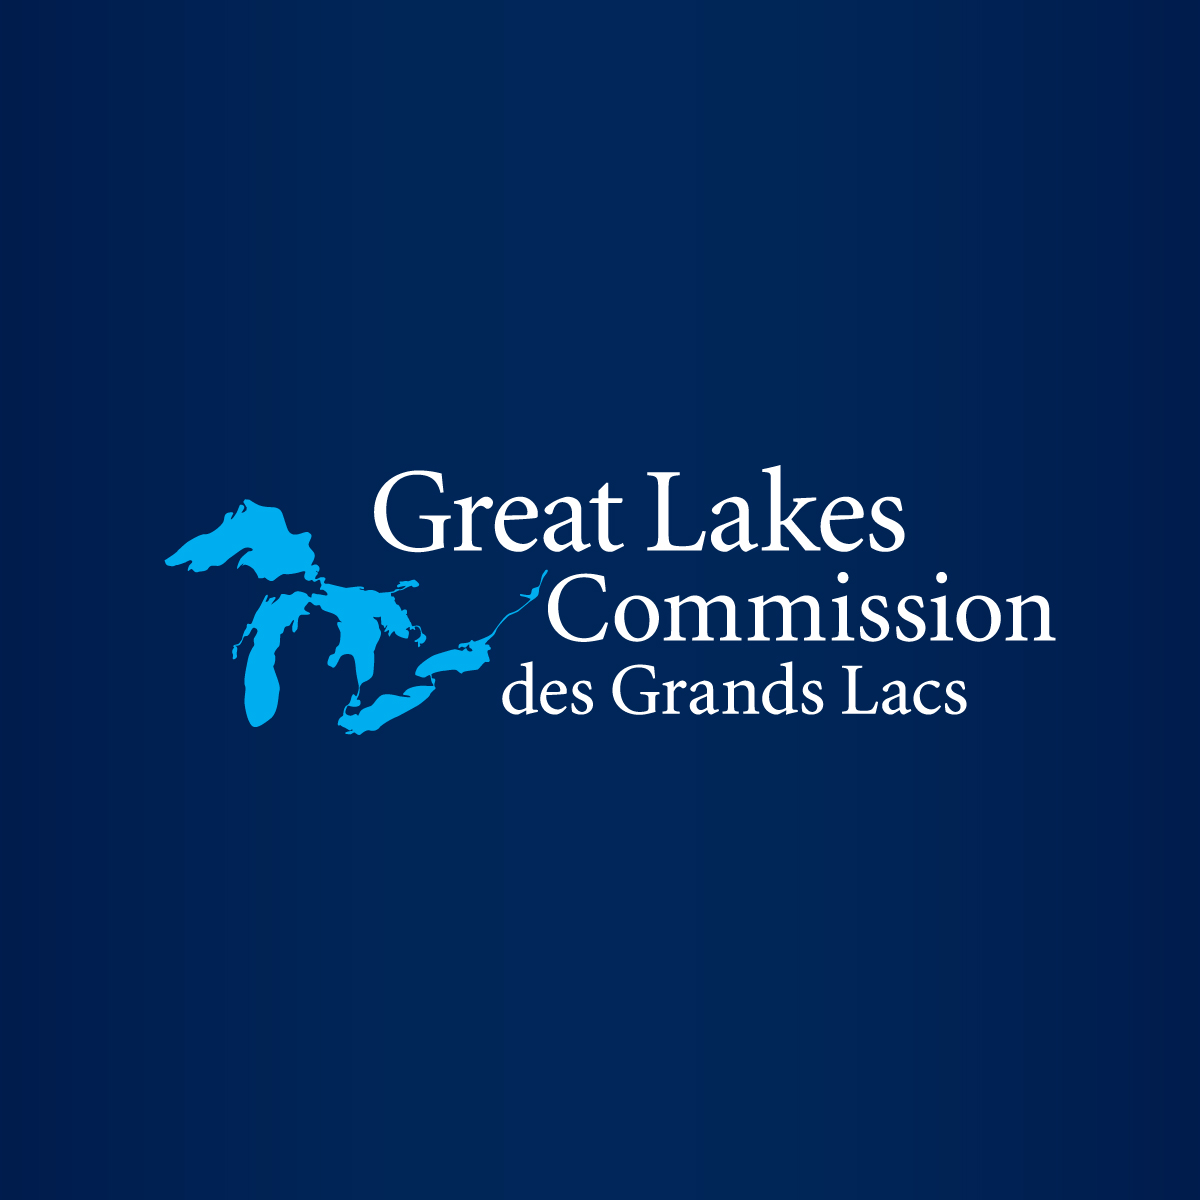 Today is Great Lakes Awareness Day